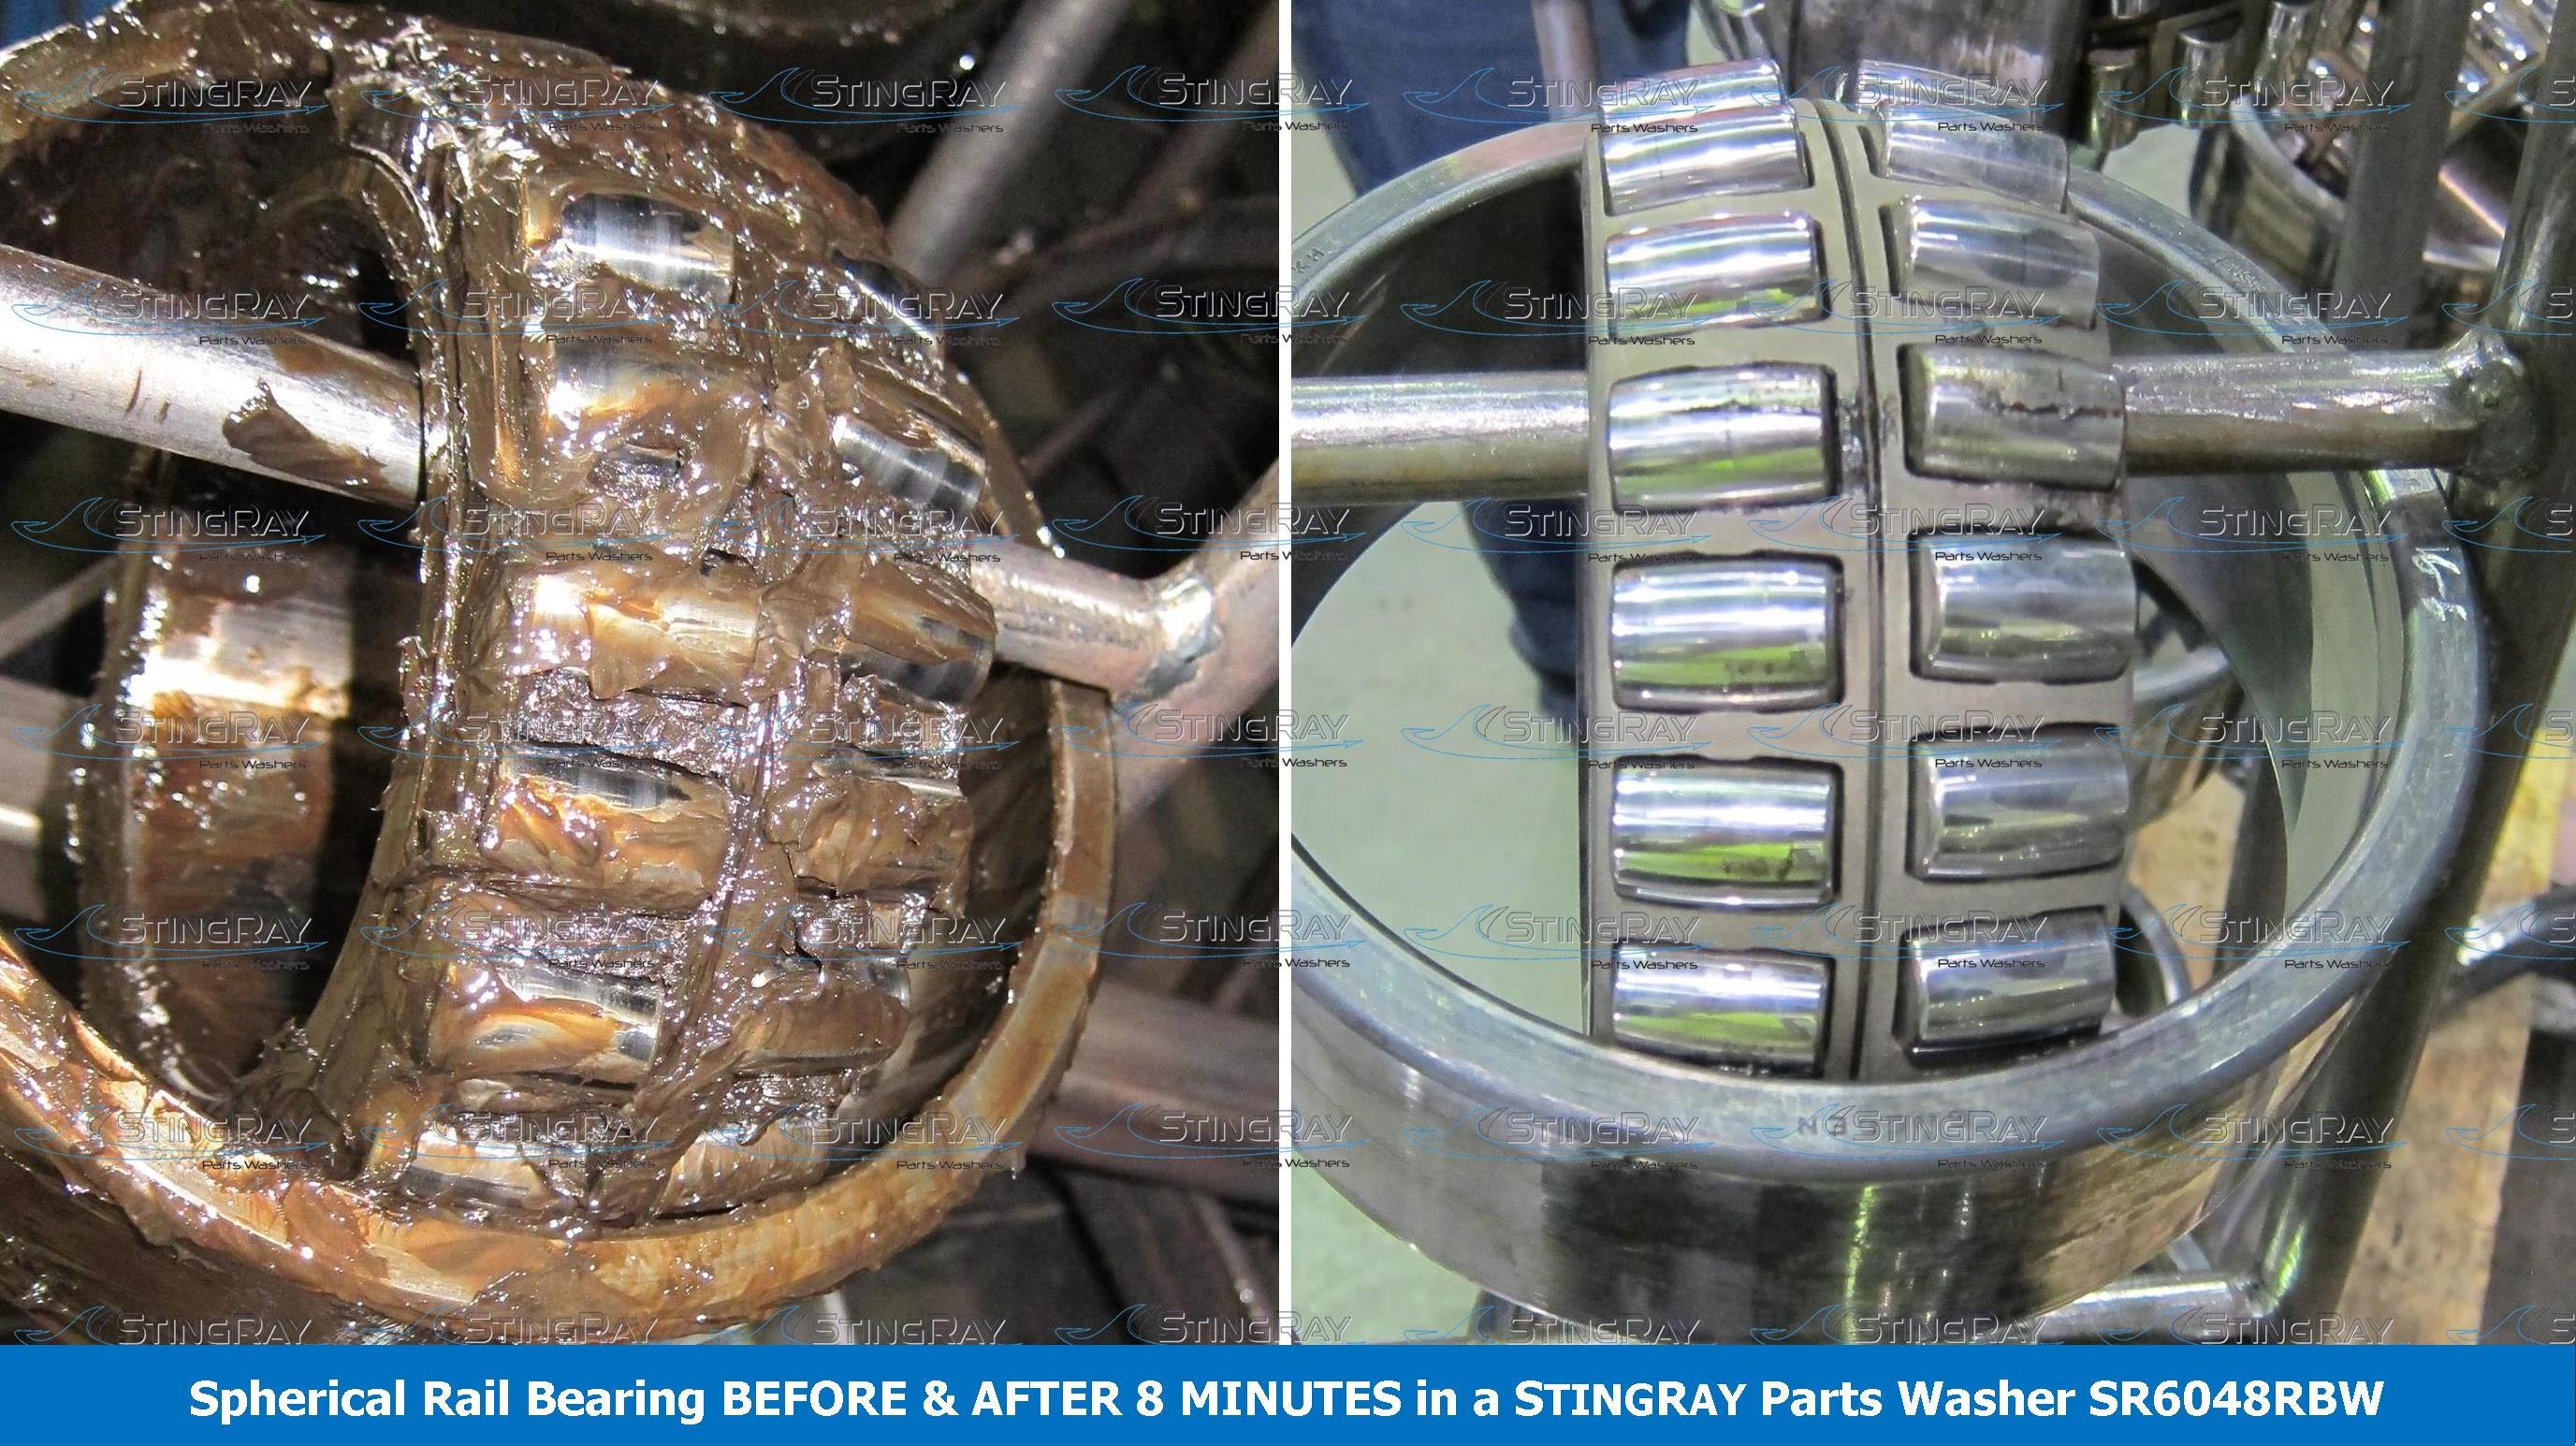 Rail-Bearing-with-Watermark/Spherical-Rail-Bearing-Cleaning-Results-in-a-StingRay-Parts-Washer